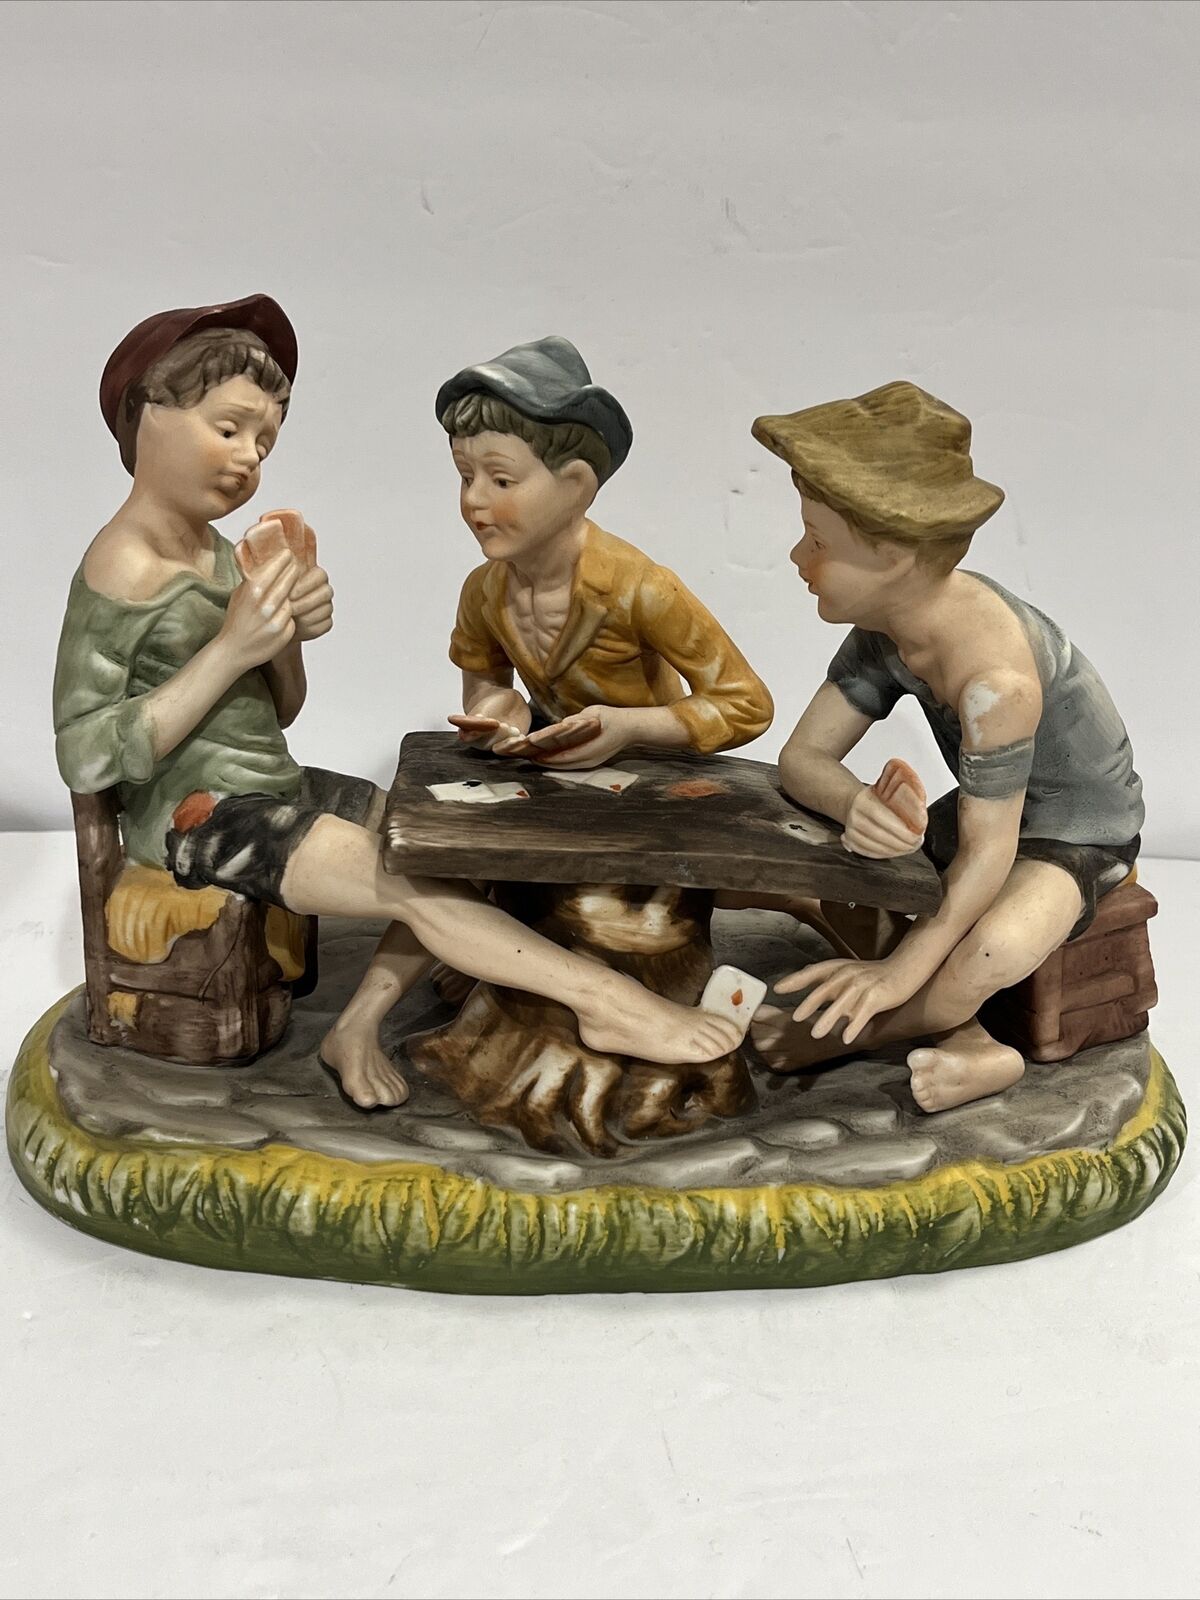 Capodimonte The Three Cheaters Boys Poker Players Porcelain Sculpture Italy